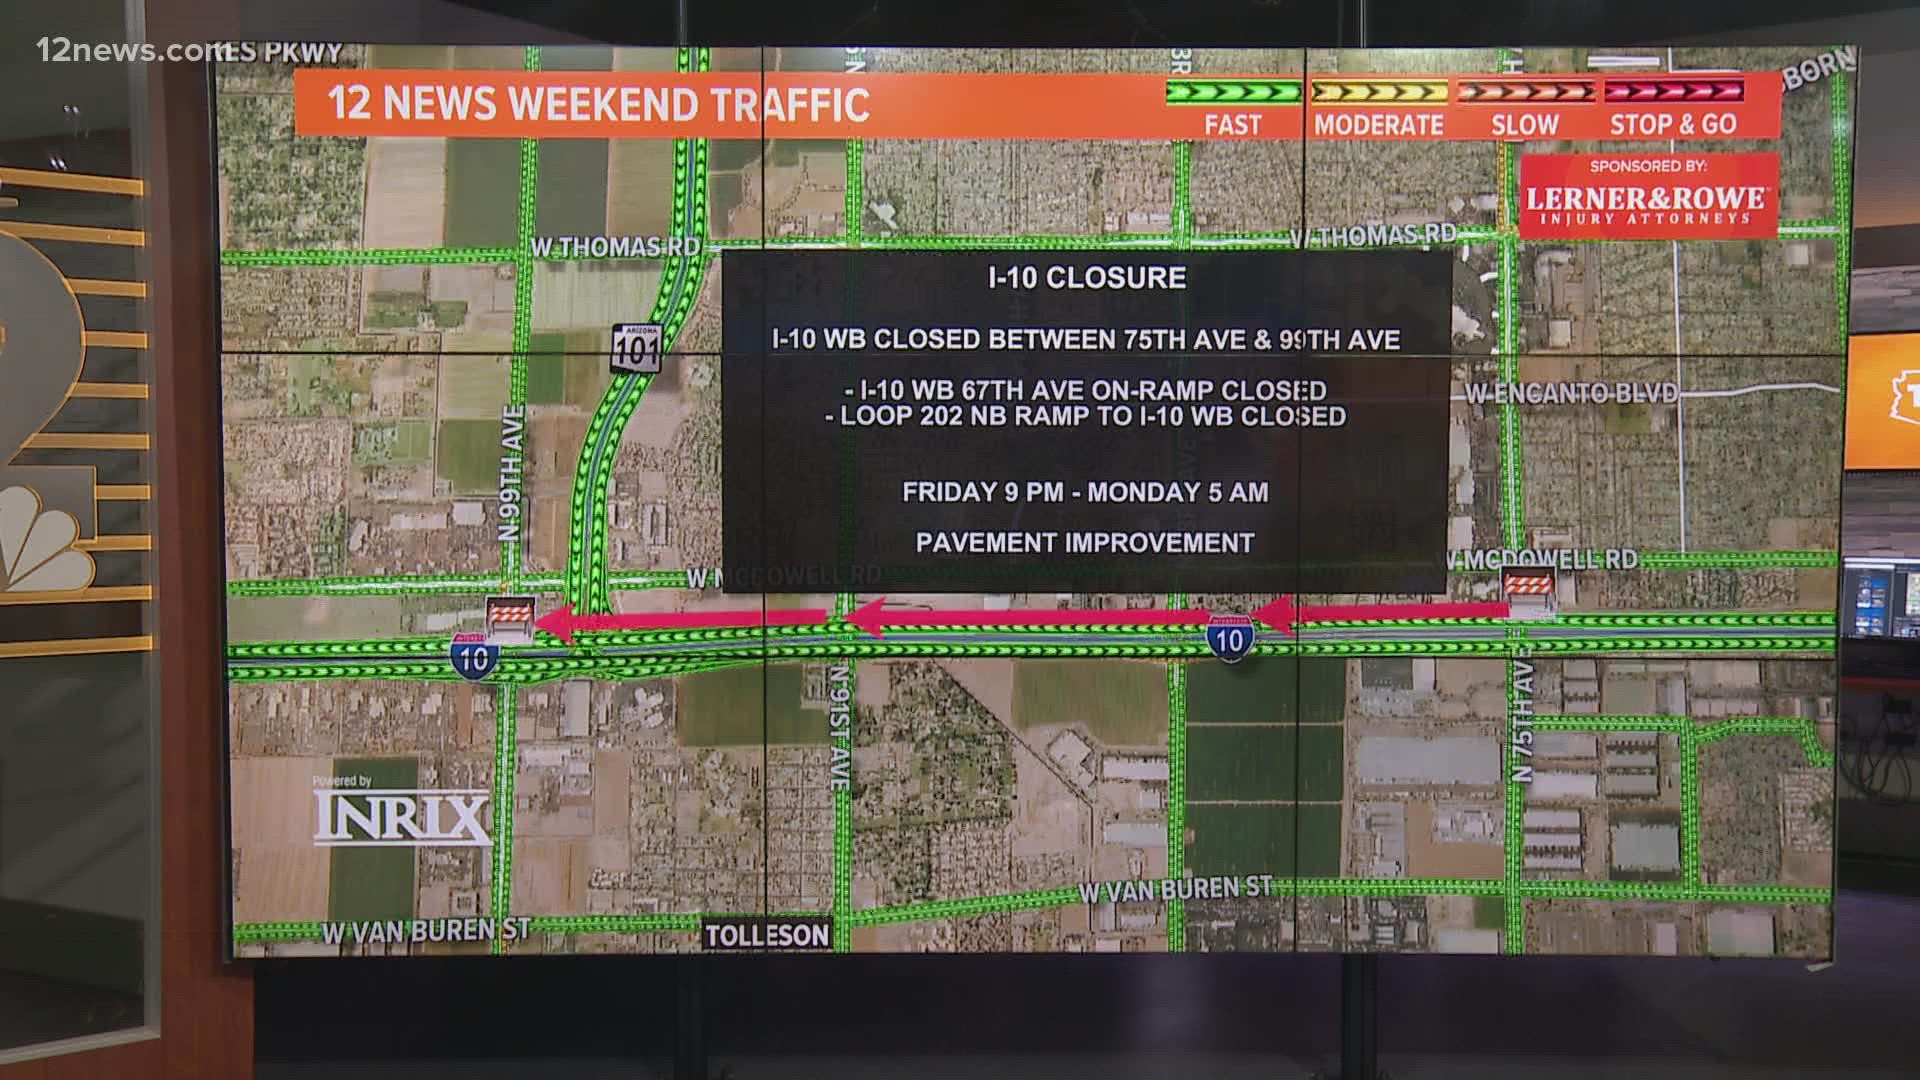 Here's information on traffic closures and detours on Valley roads this weekend.